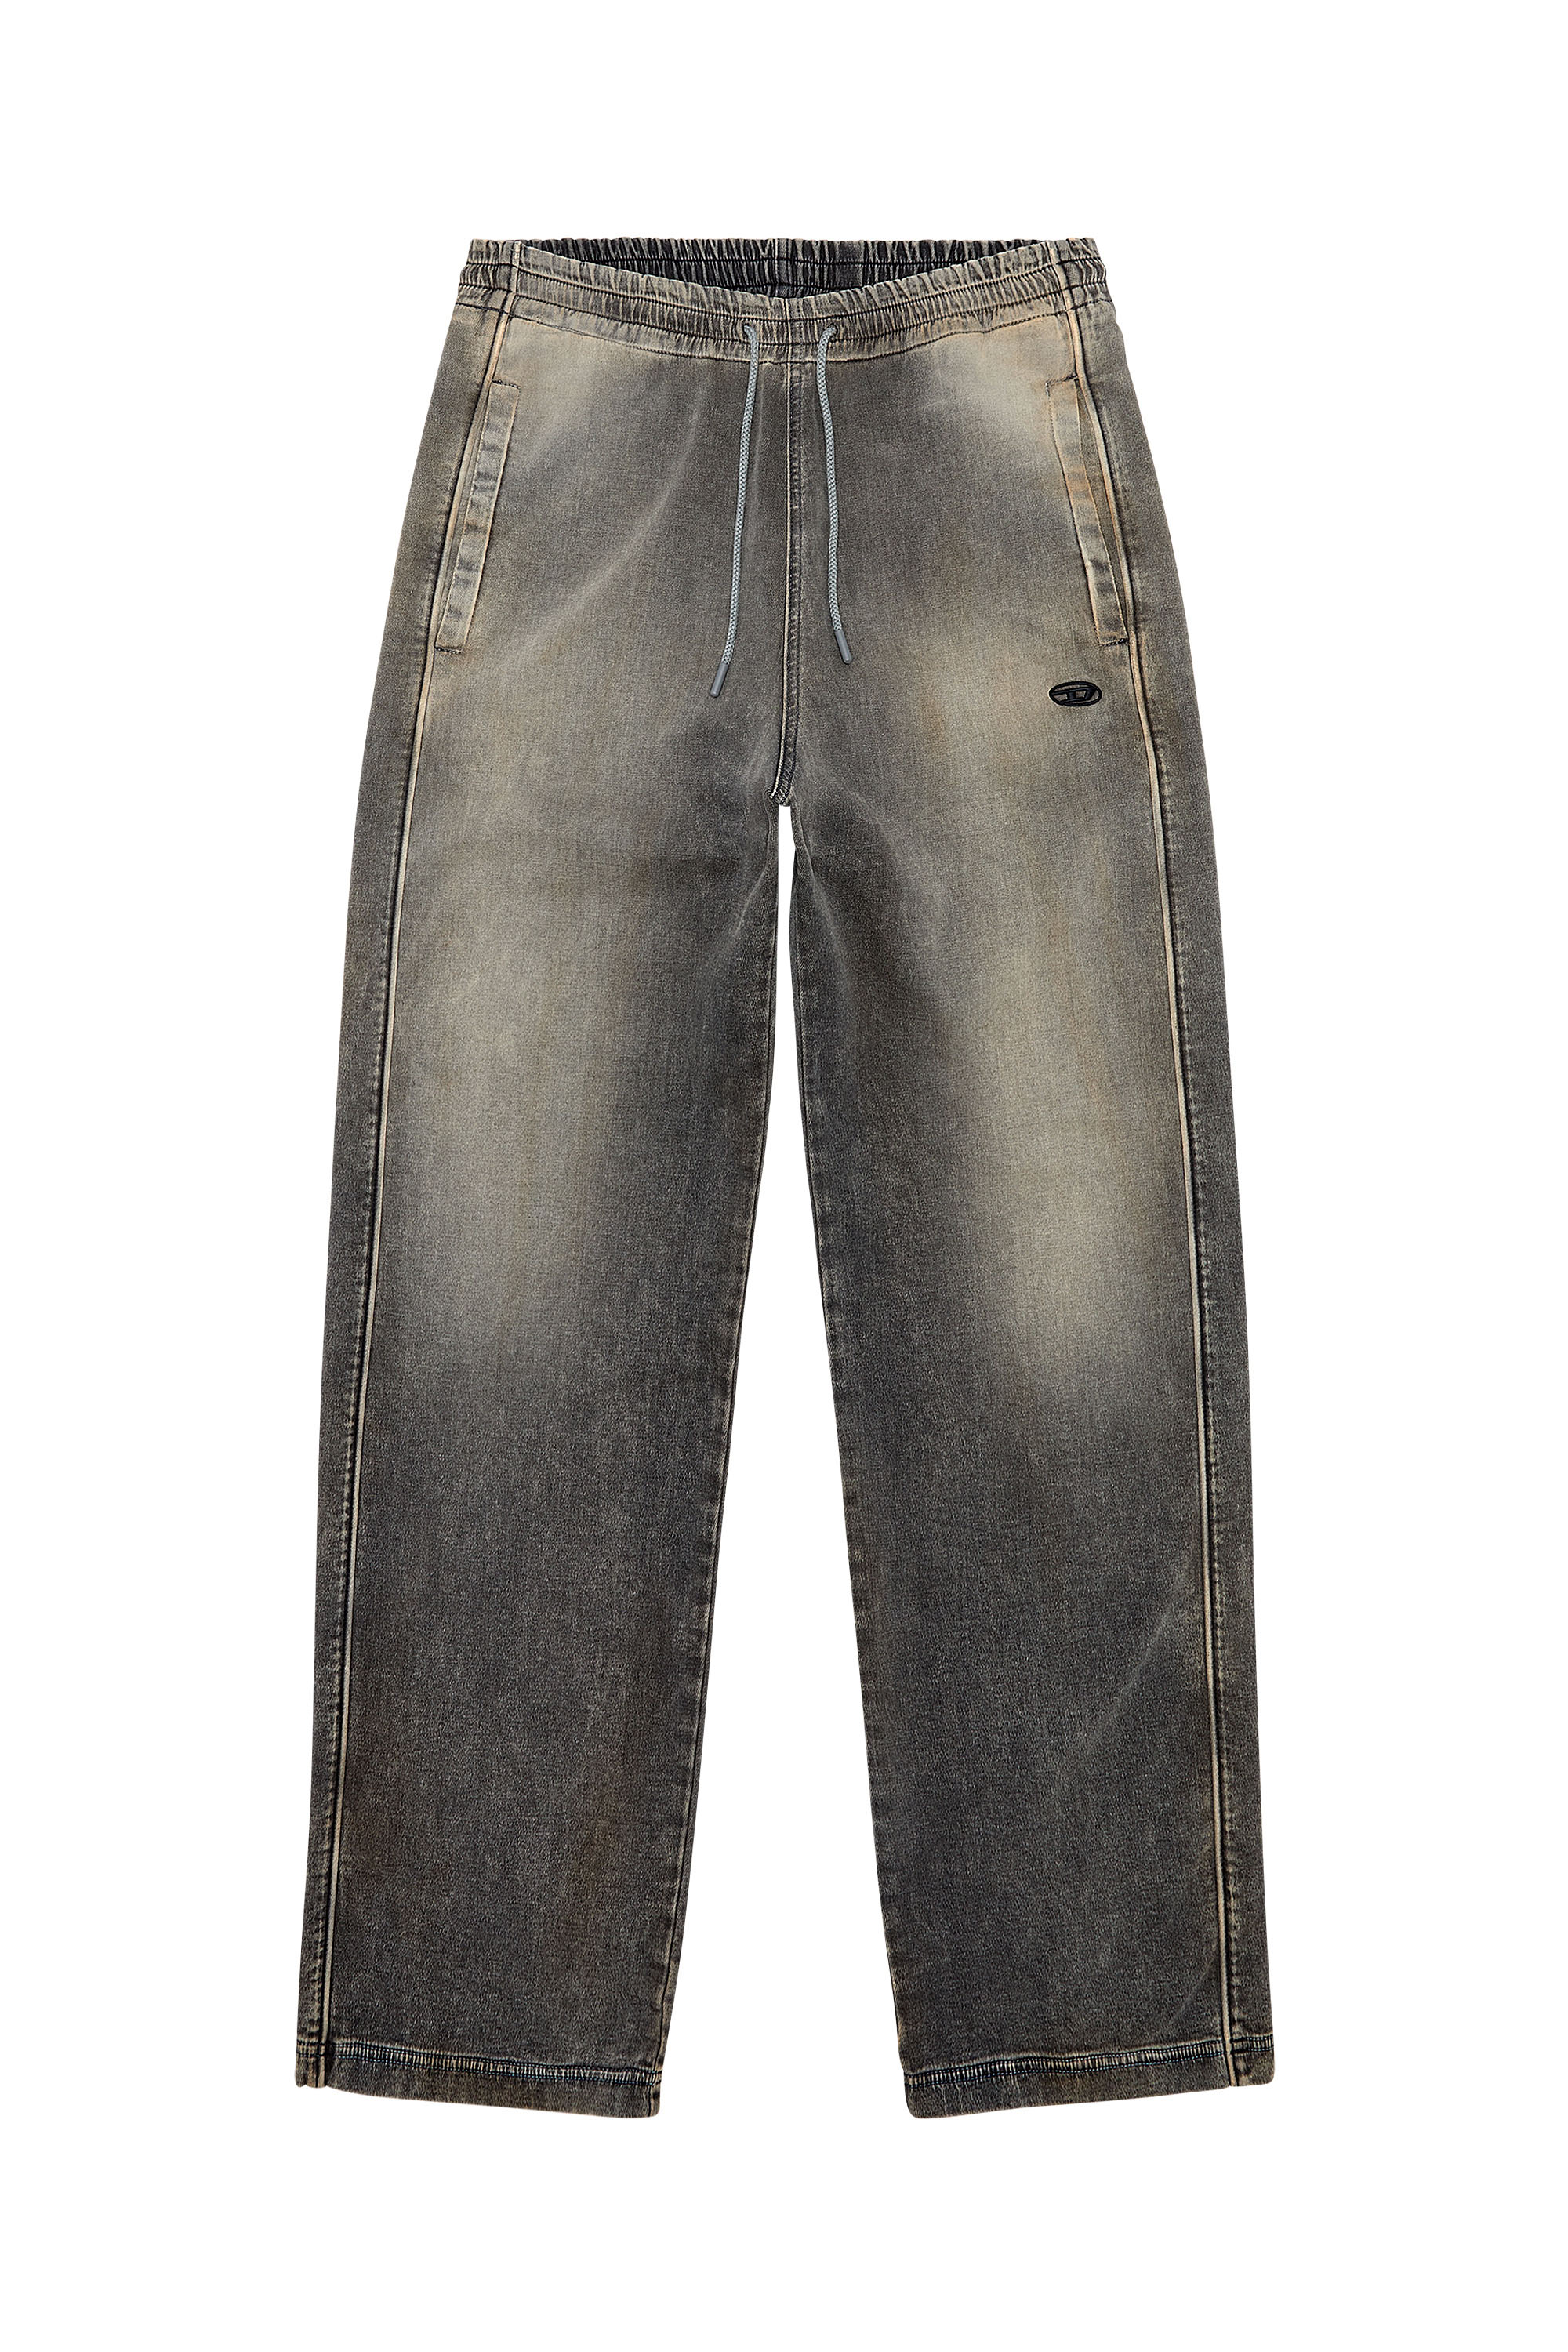 Diesel Combines Denim With Sweat Pants, Would You Wear Them?